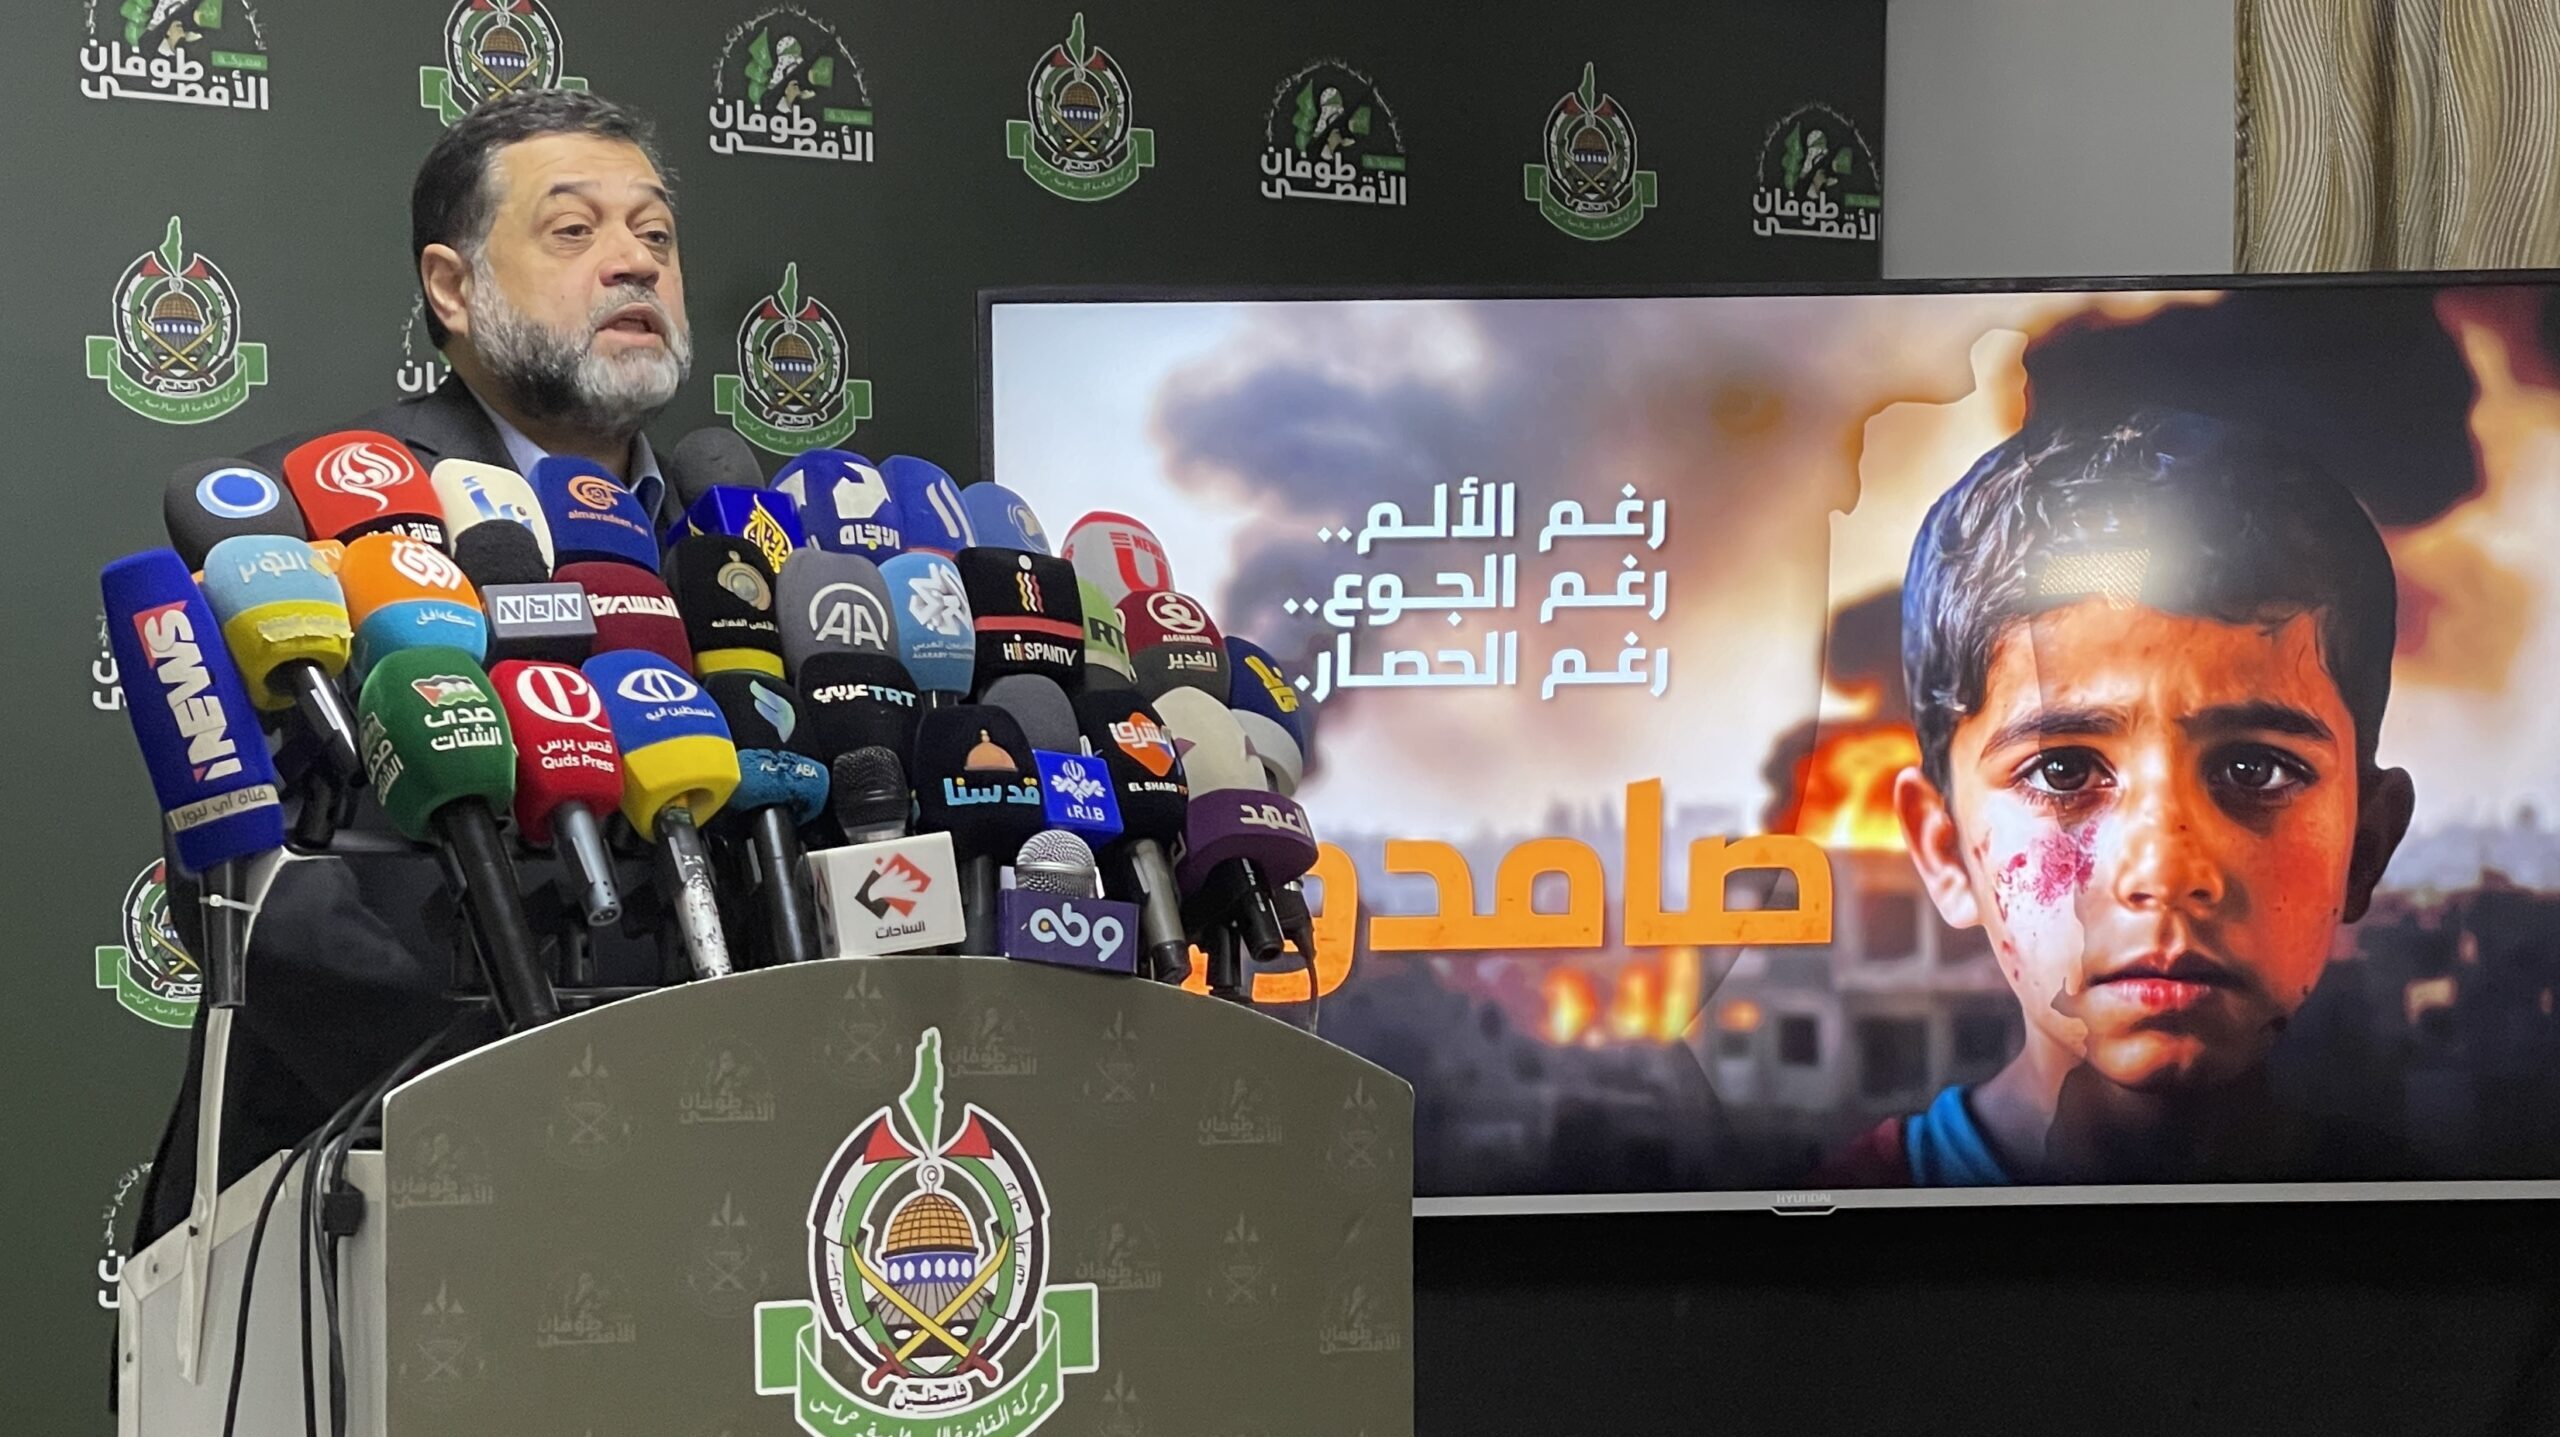 Hamas Continues Cease-fire Efforts in Egypt Despite Israeli Absence